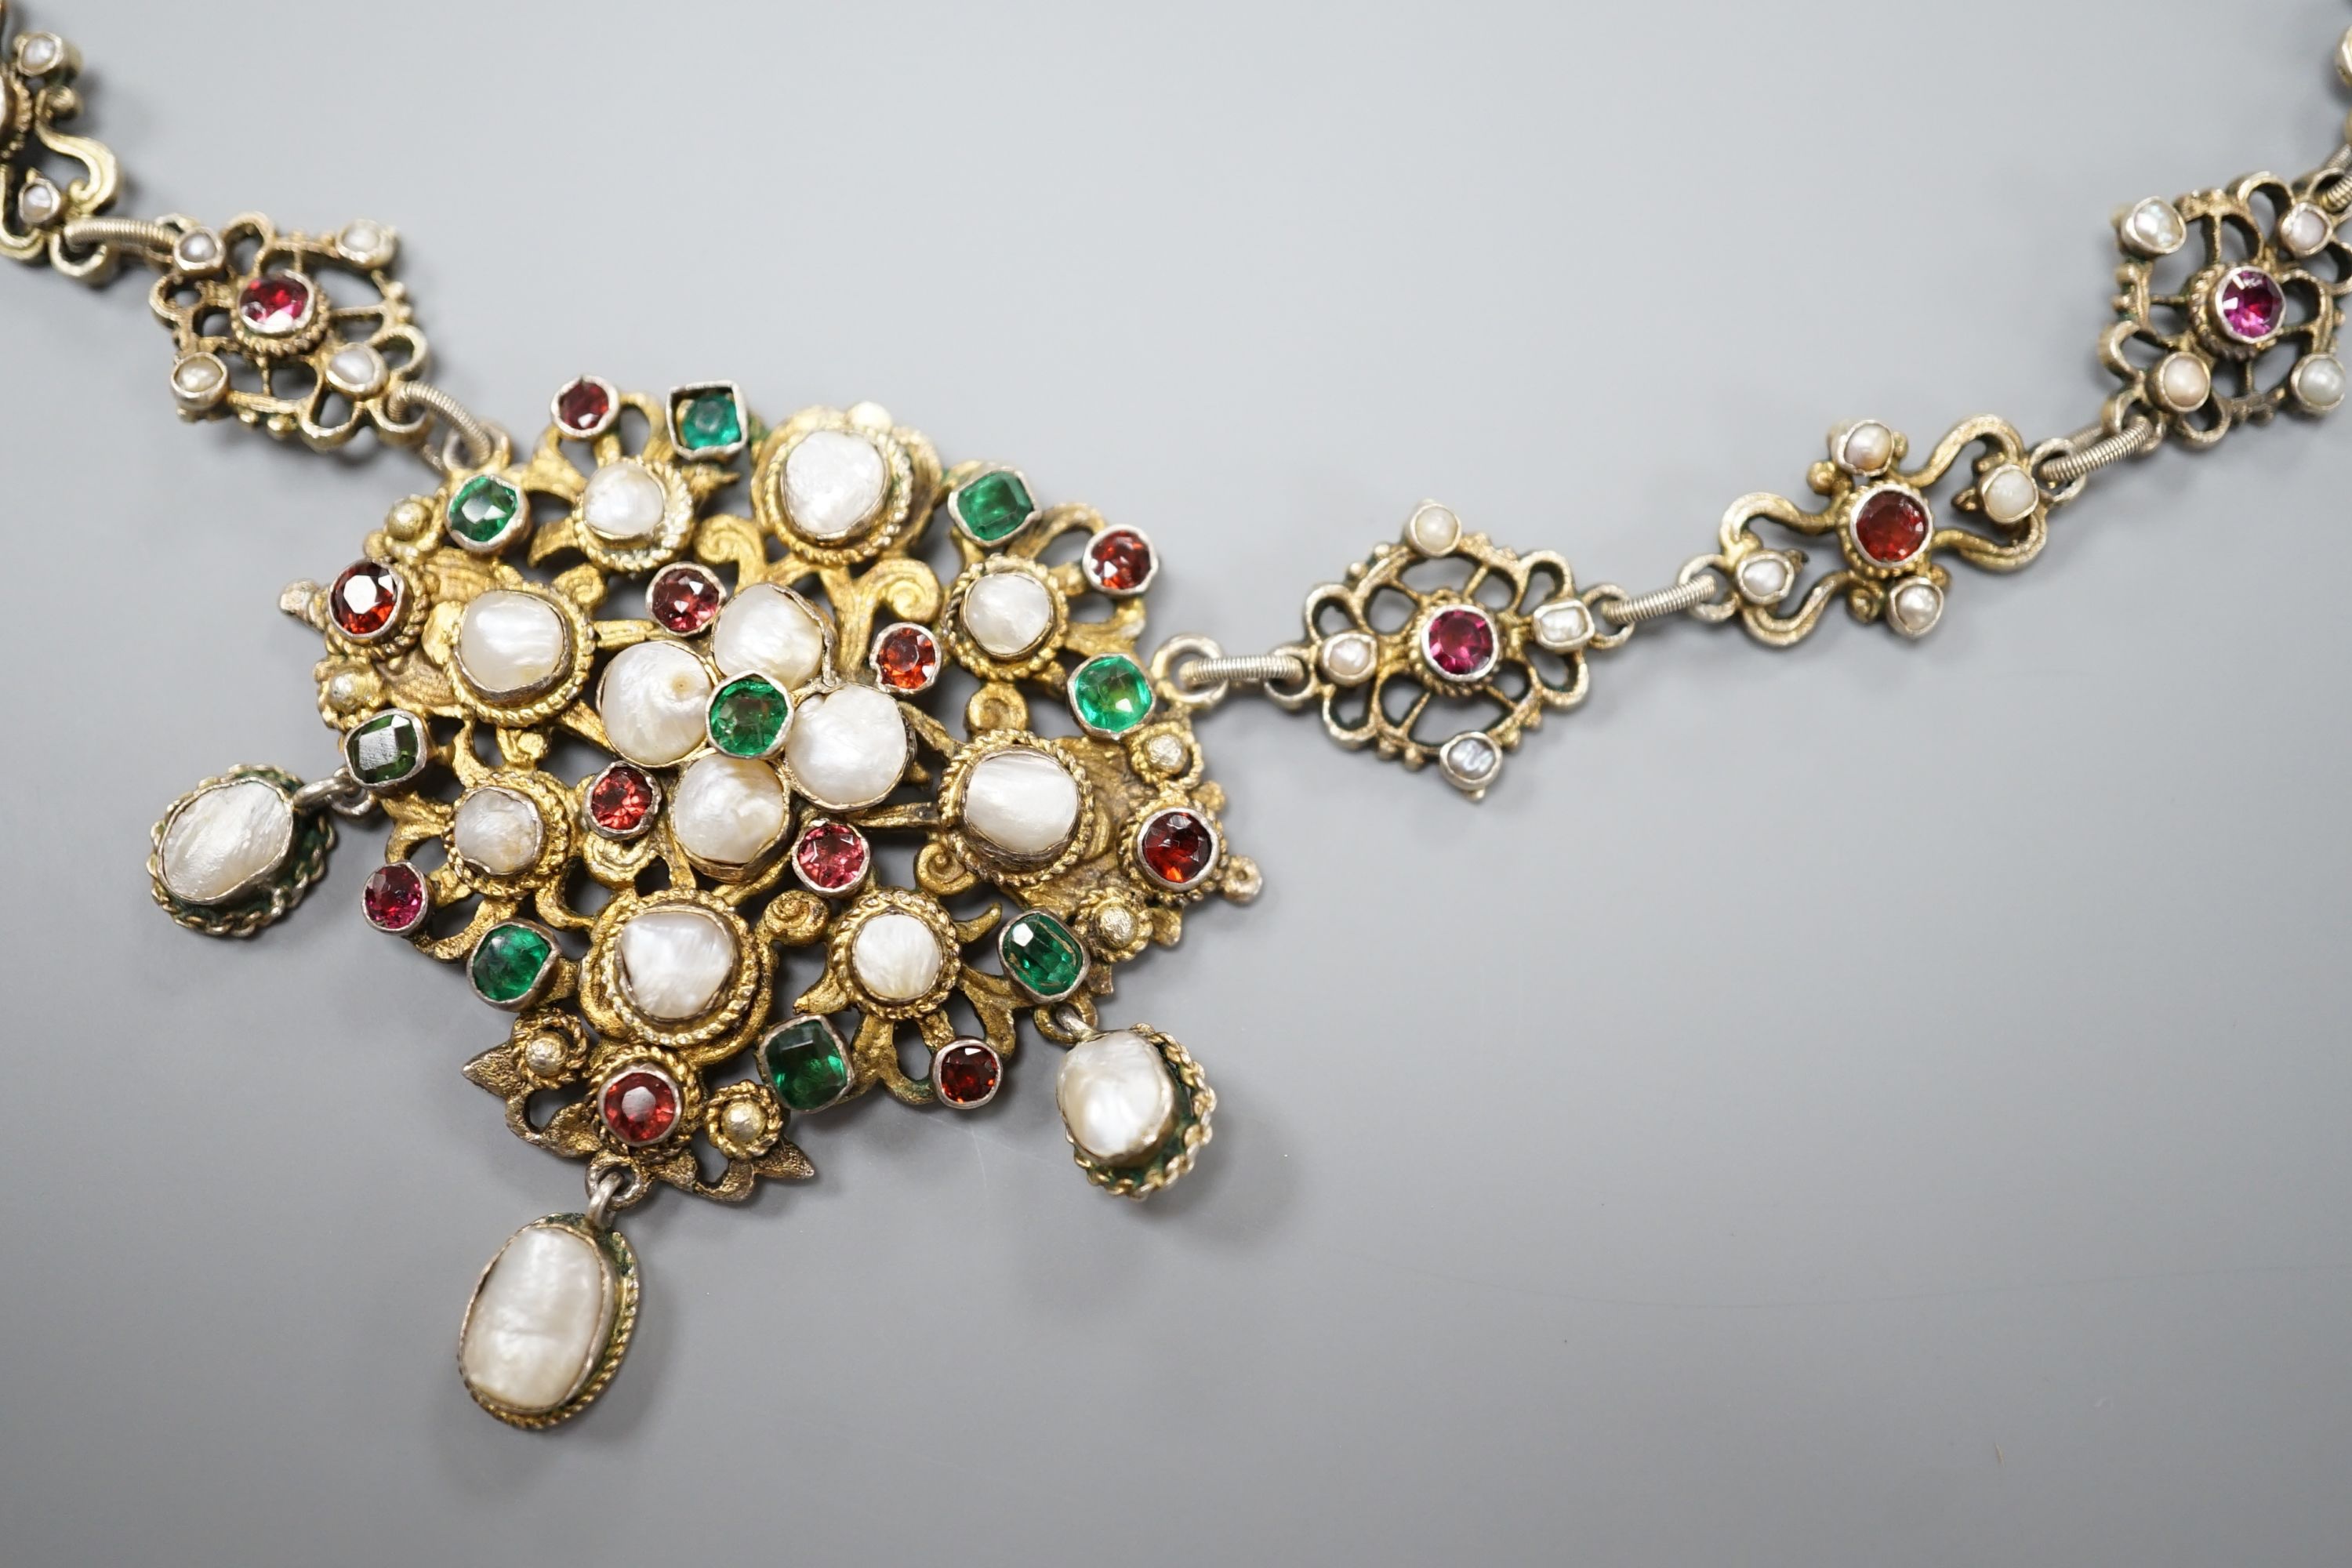 An ornate 19th century Austro-Hungarian gilt white metal, baroque pearl, paste and gem set drop necklace, 46cm, maker's mark WH or WM.